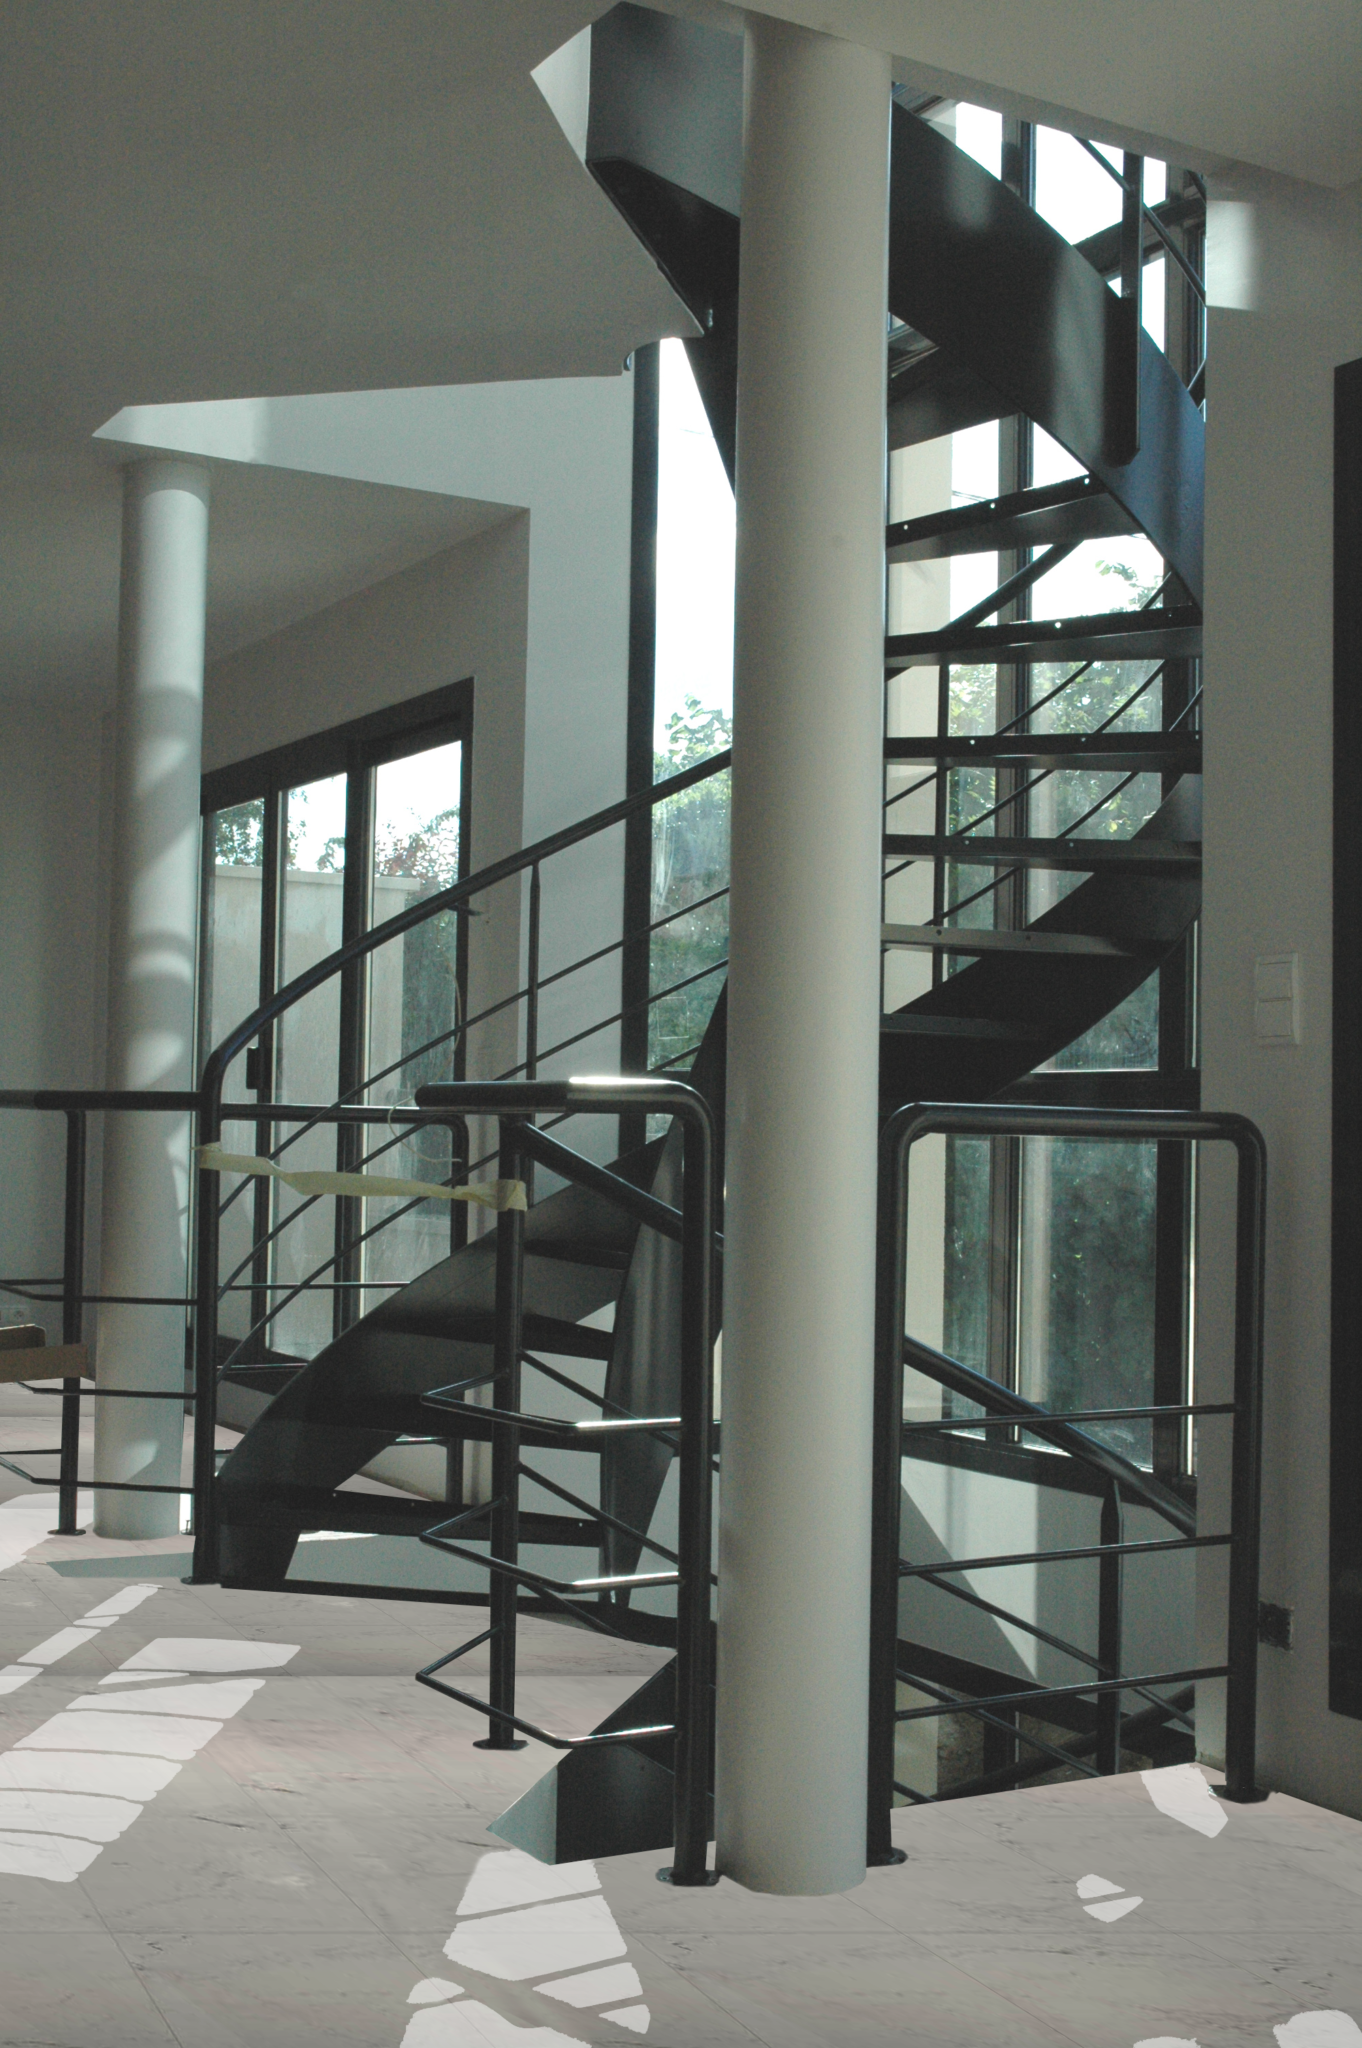 Photo of the steel spiral staircase with its pillars on either side